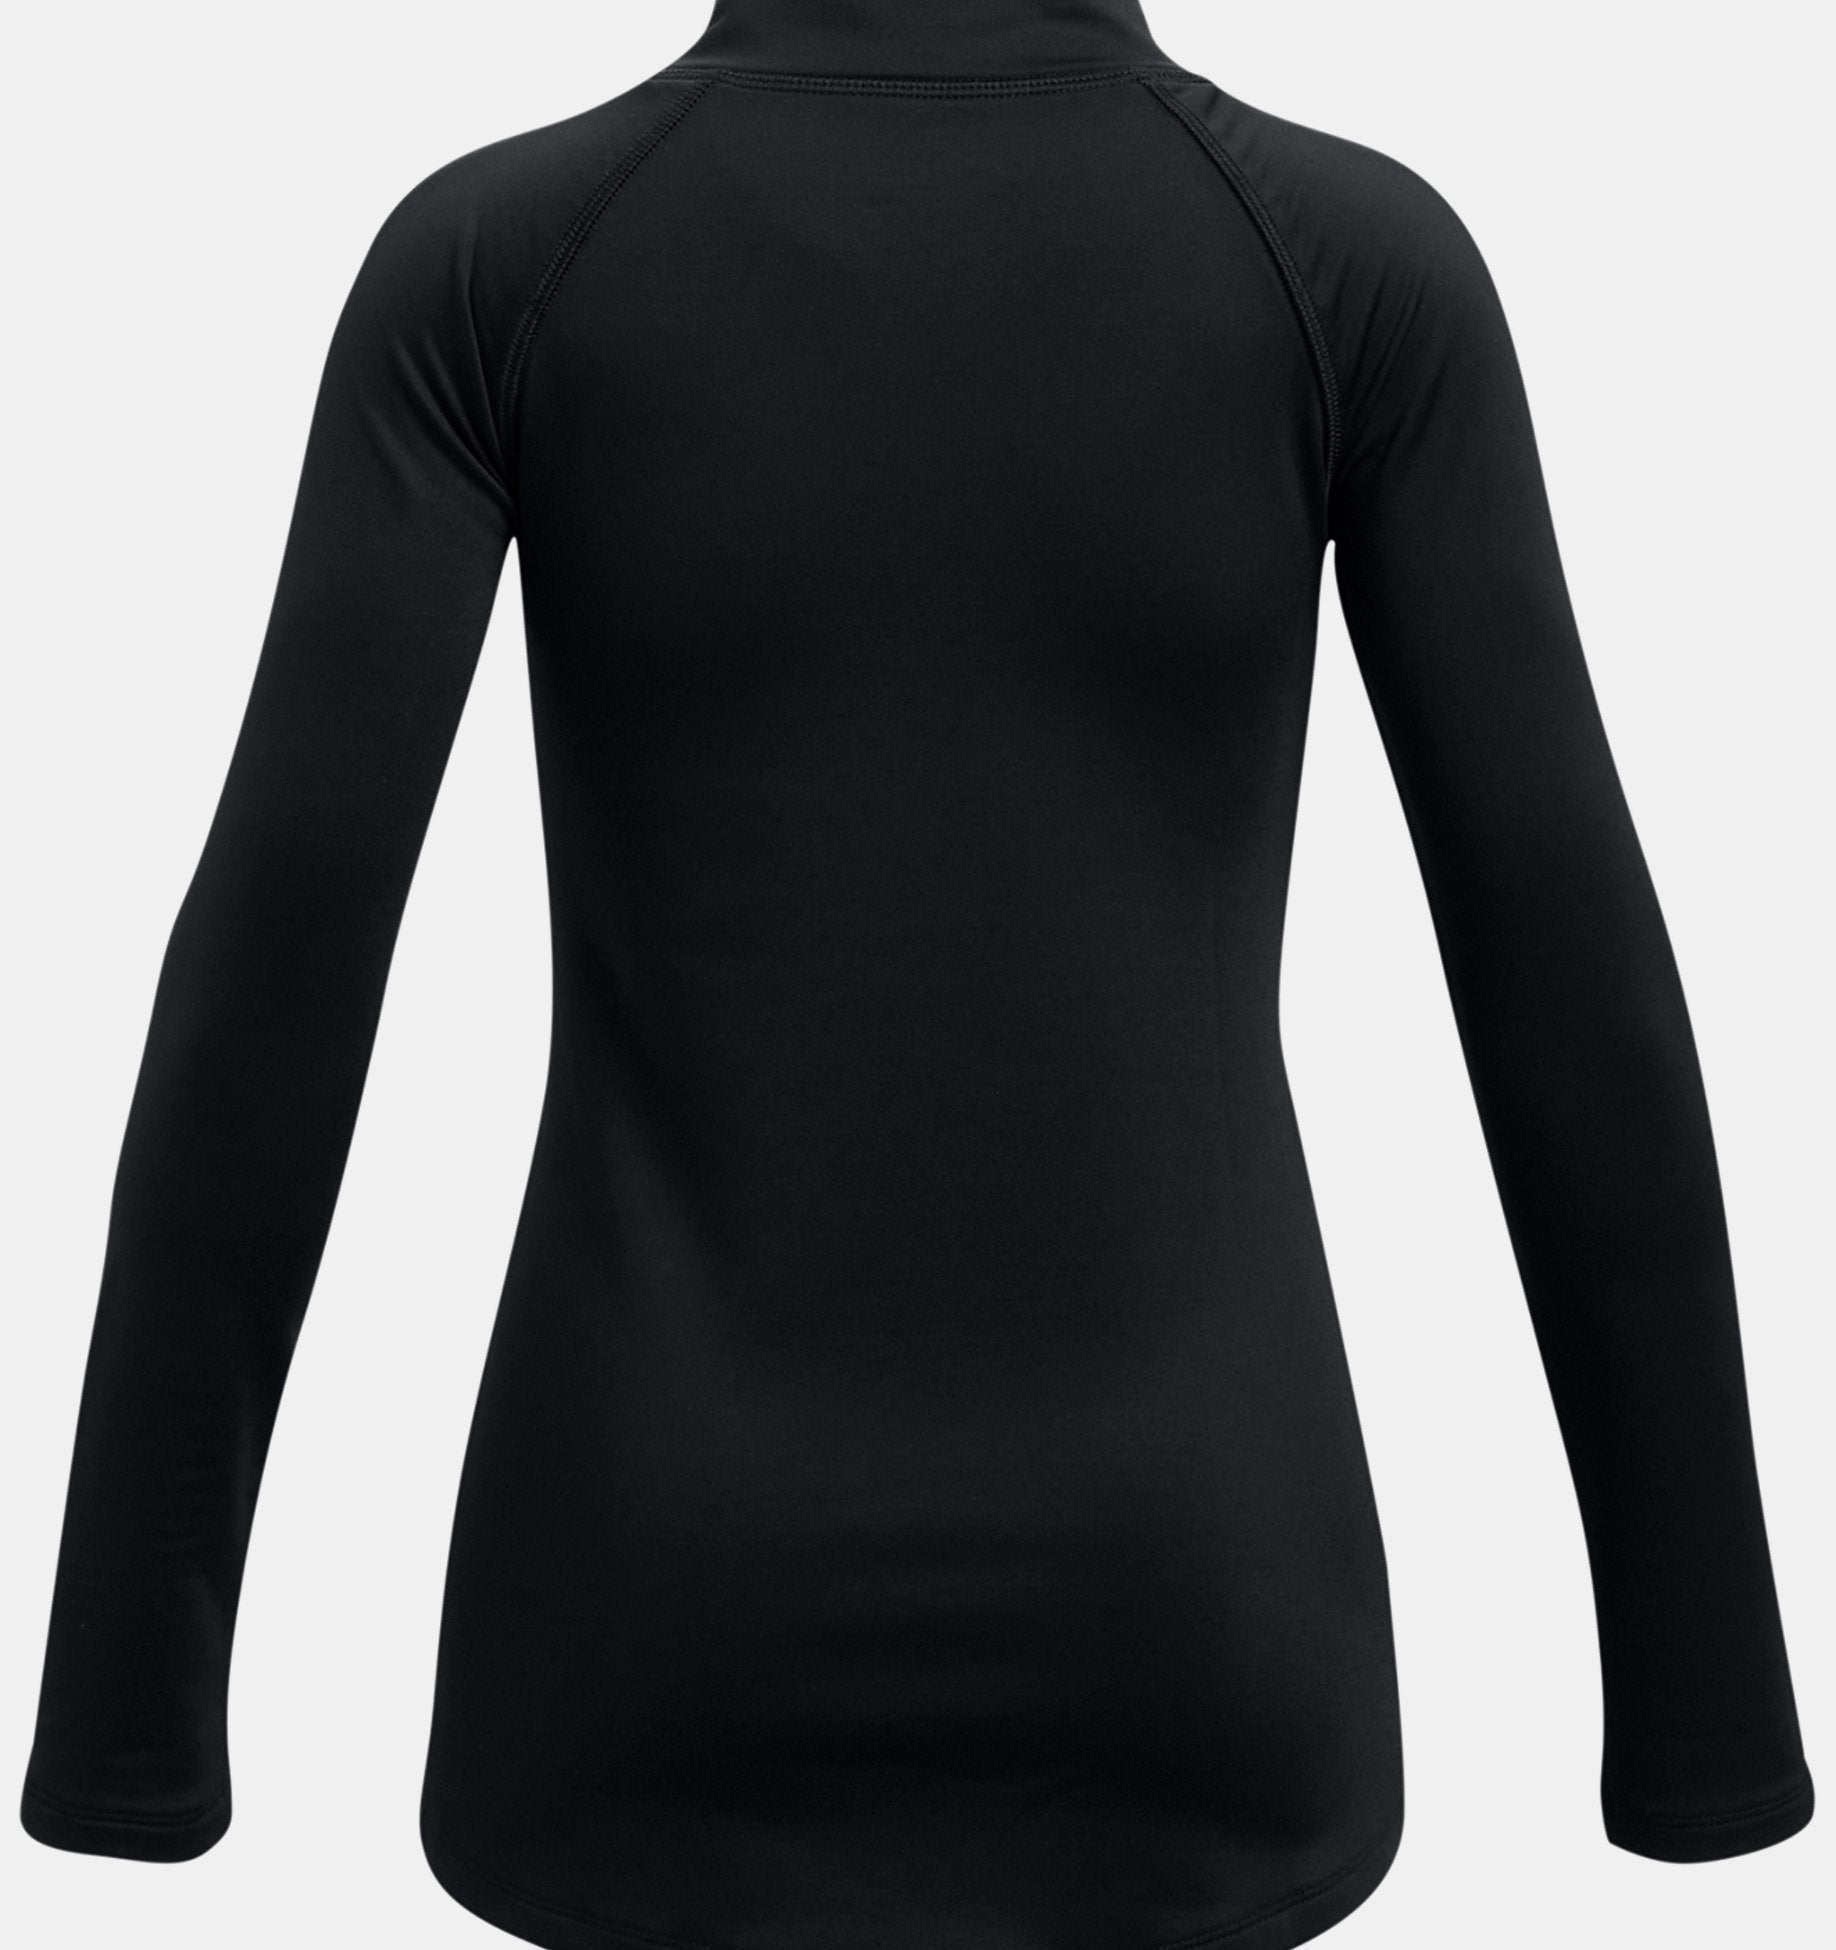 Under Armour Cold Gear Girl's Mock Long Sleeve Shirt-Sports Replay - Sports Excellence-Sports Replay - Sports Excellence